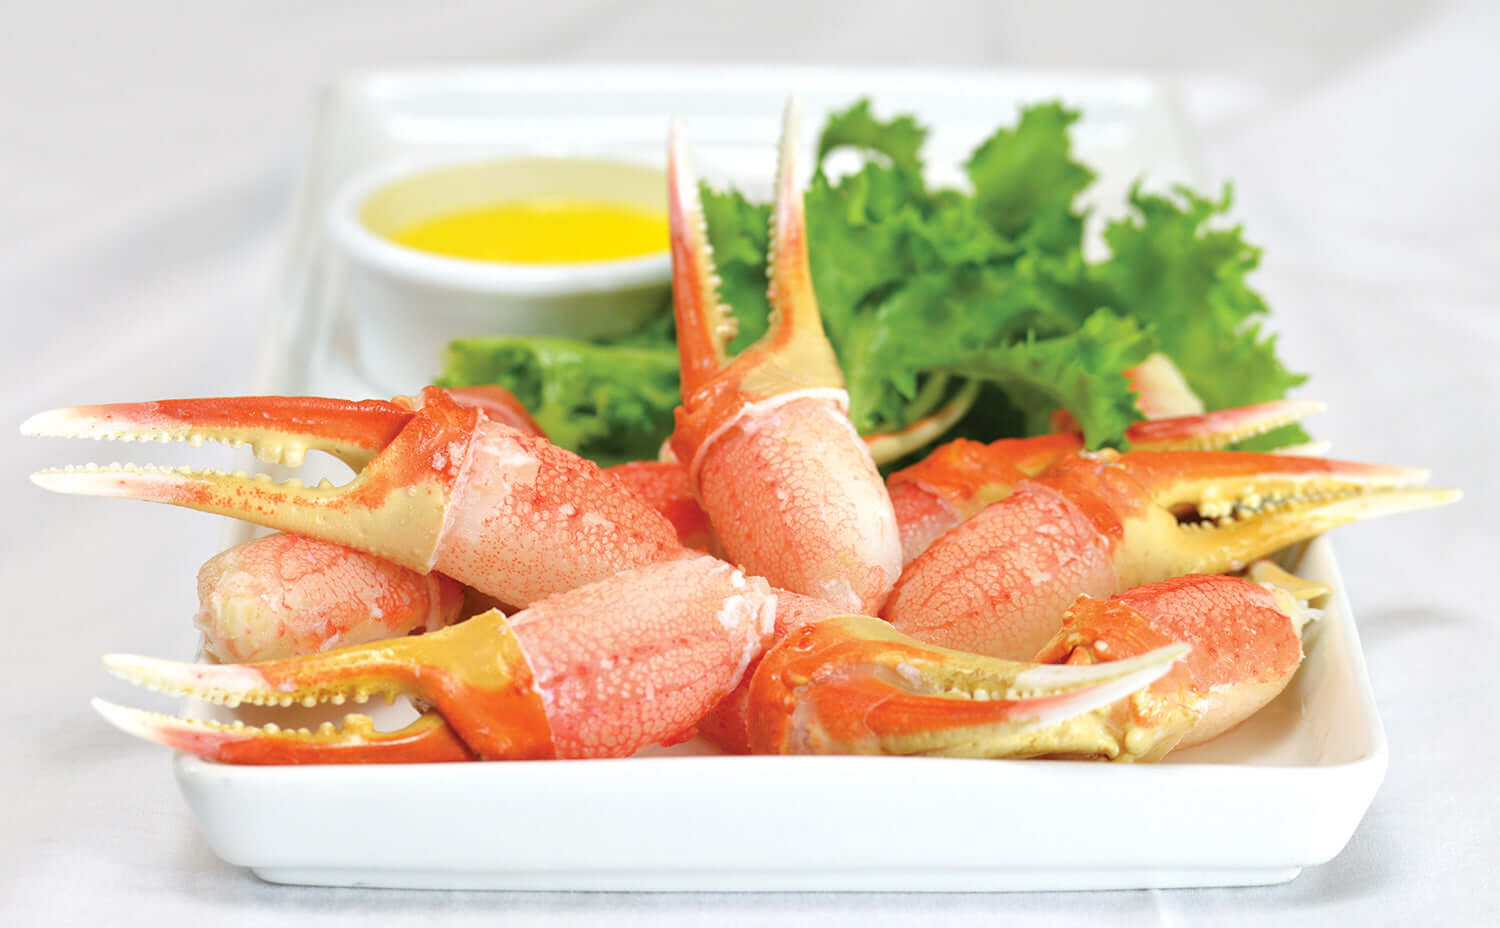 Snow crab claws on a plate